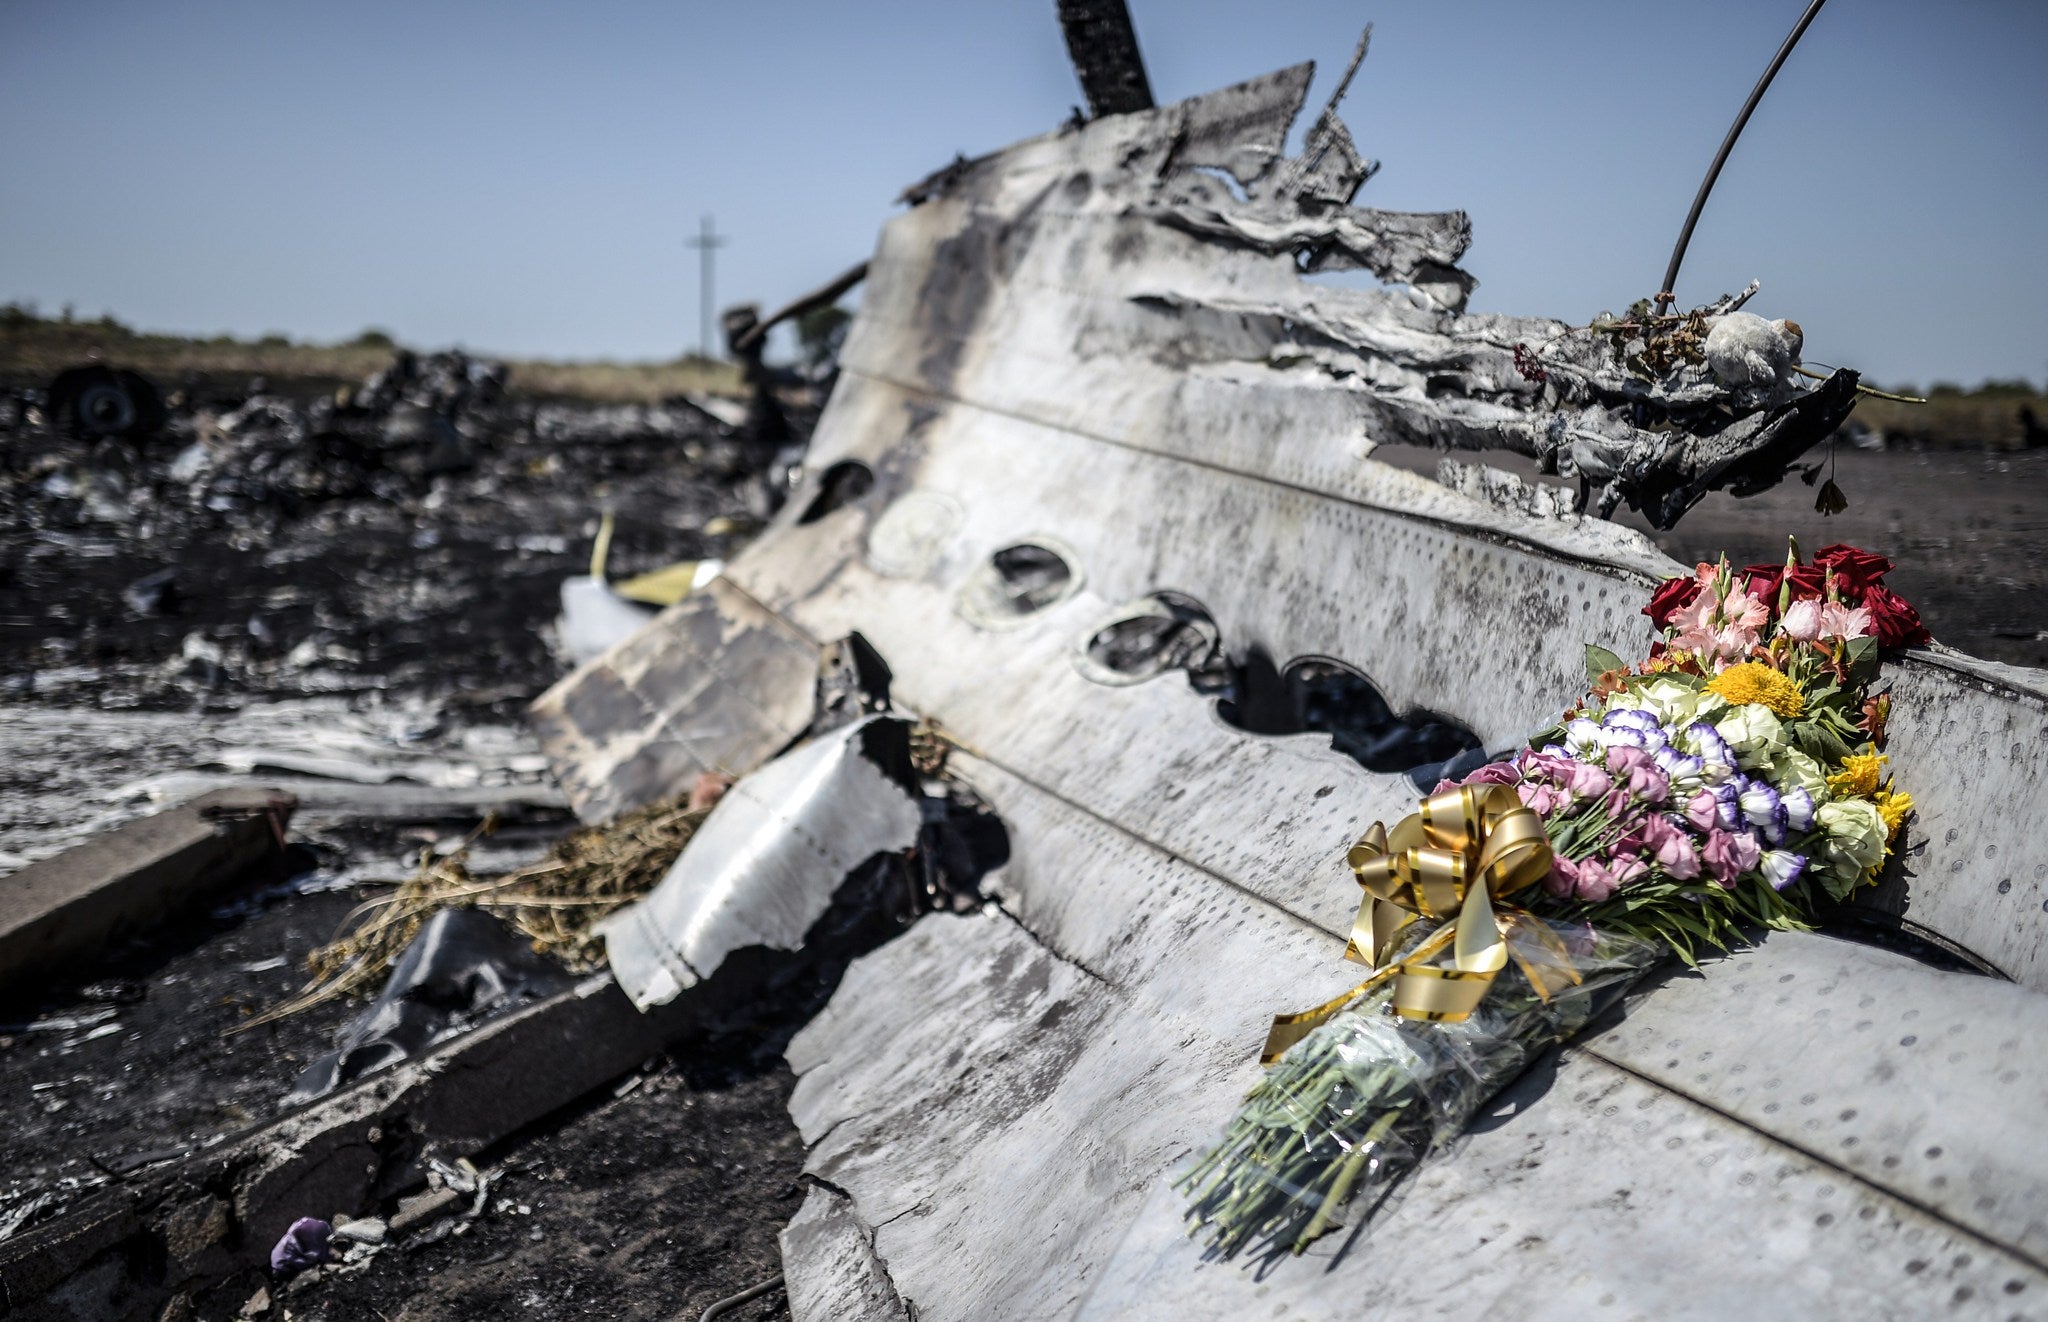 Australian and Dutch authorities have finally reached the crash site of MH17